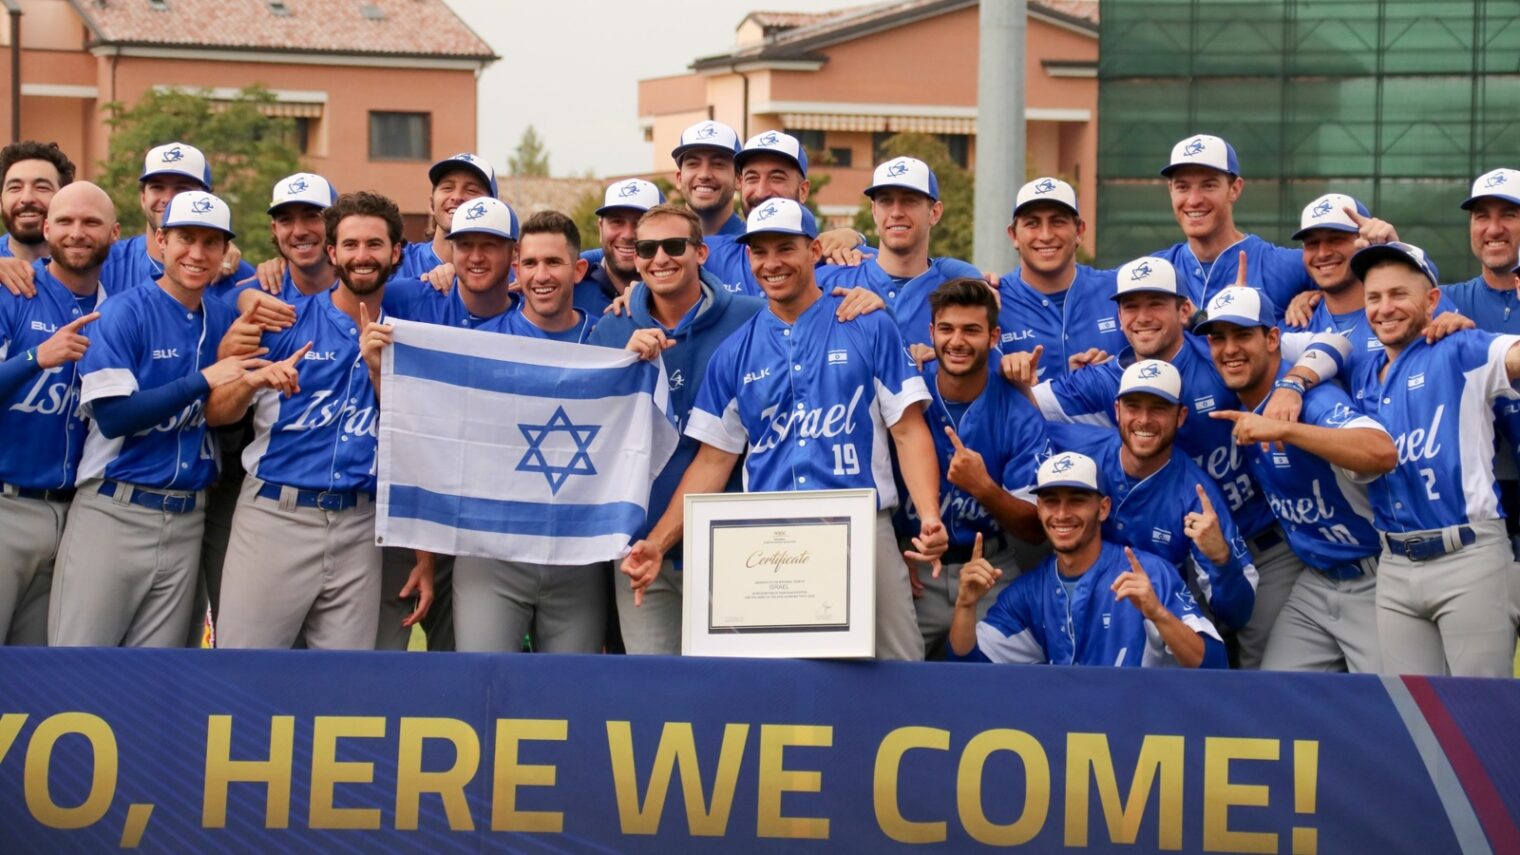 Israel’s national baseball team after qualifying for the 2020 Olympic Games. Photo courtesy of Israel Association of Baseball